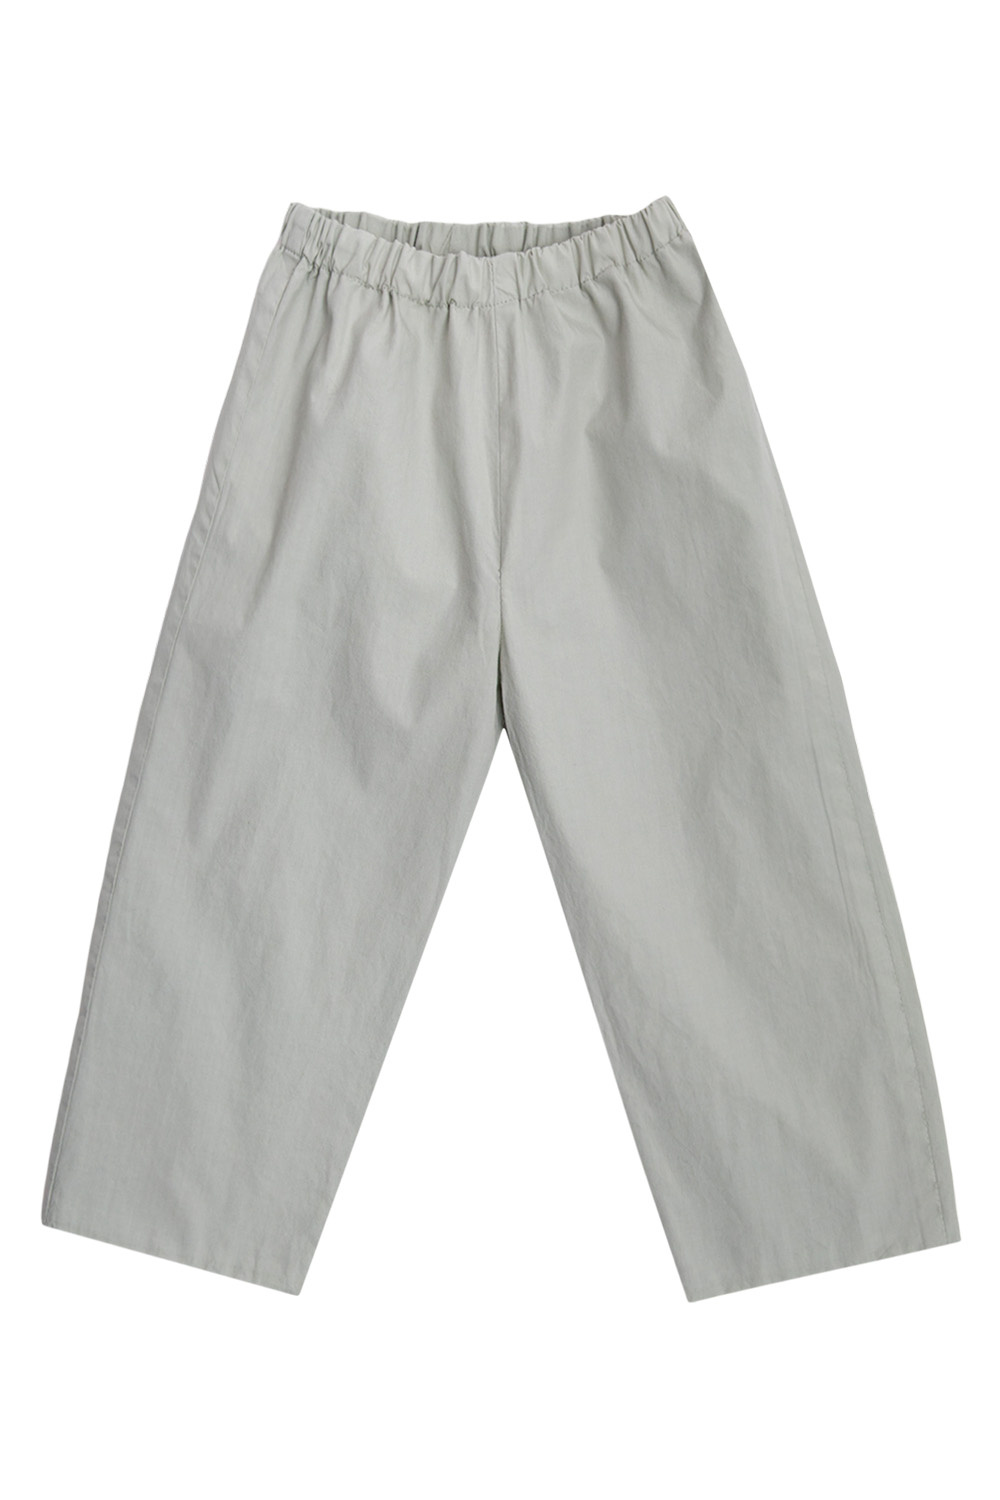 Bonpoint  trousers Crop with pocket